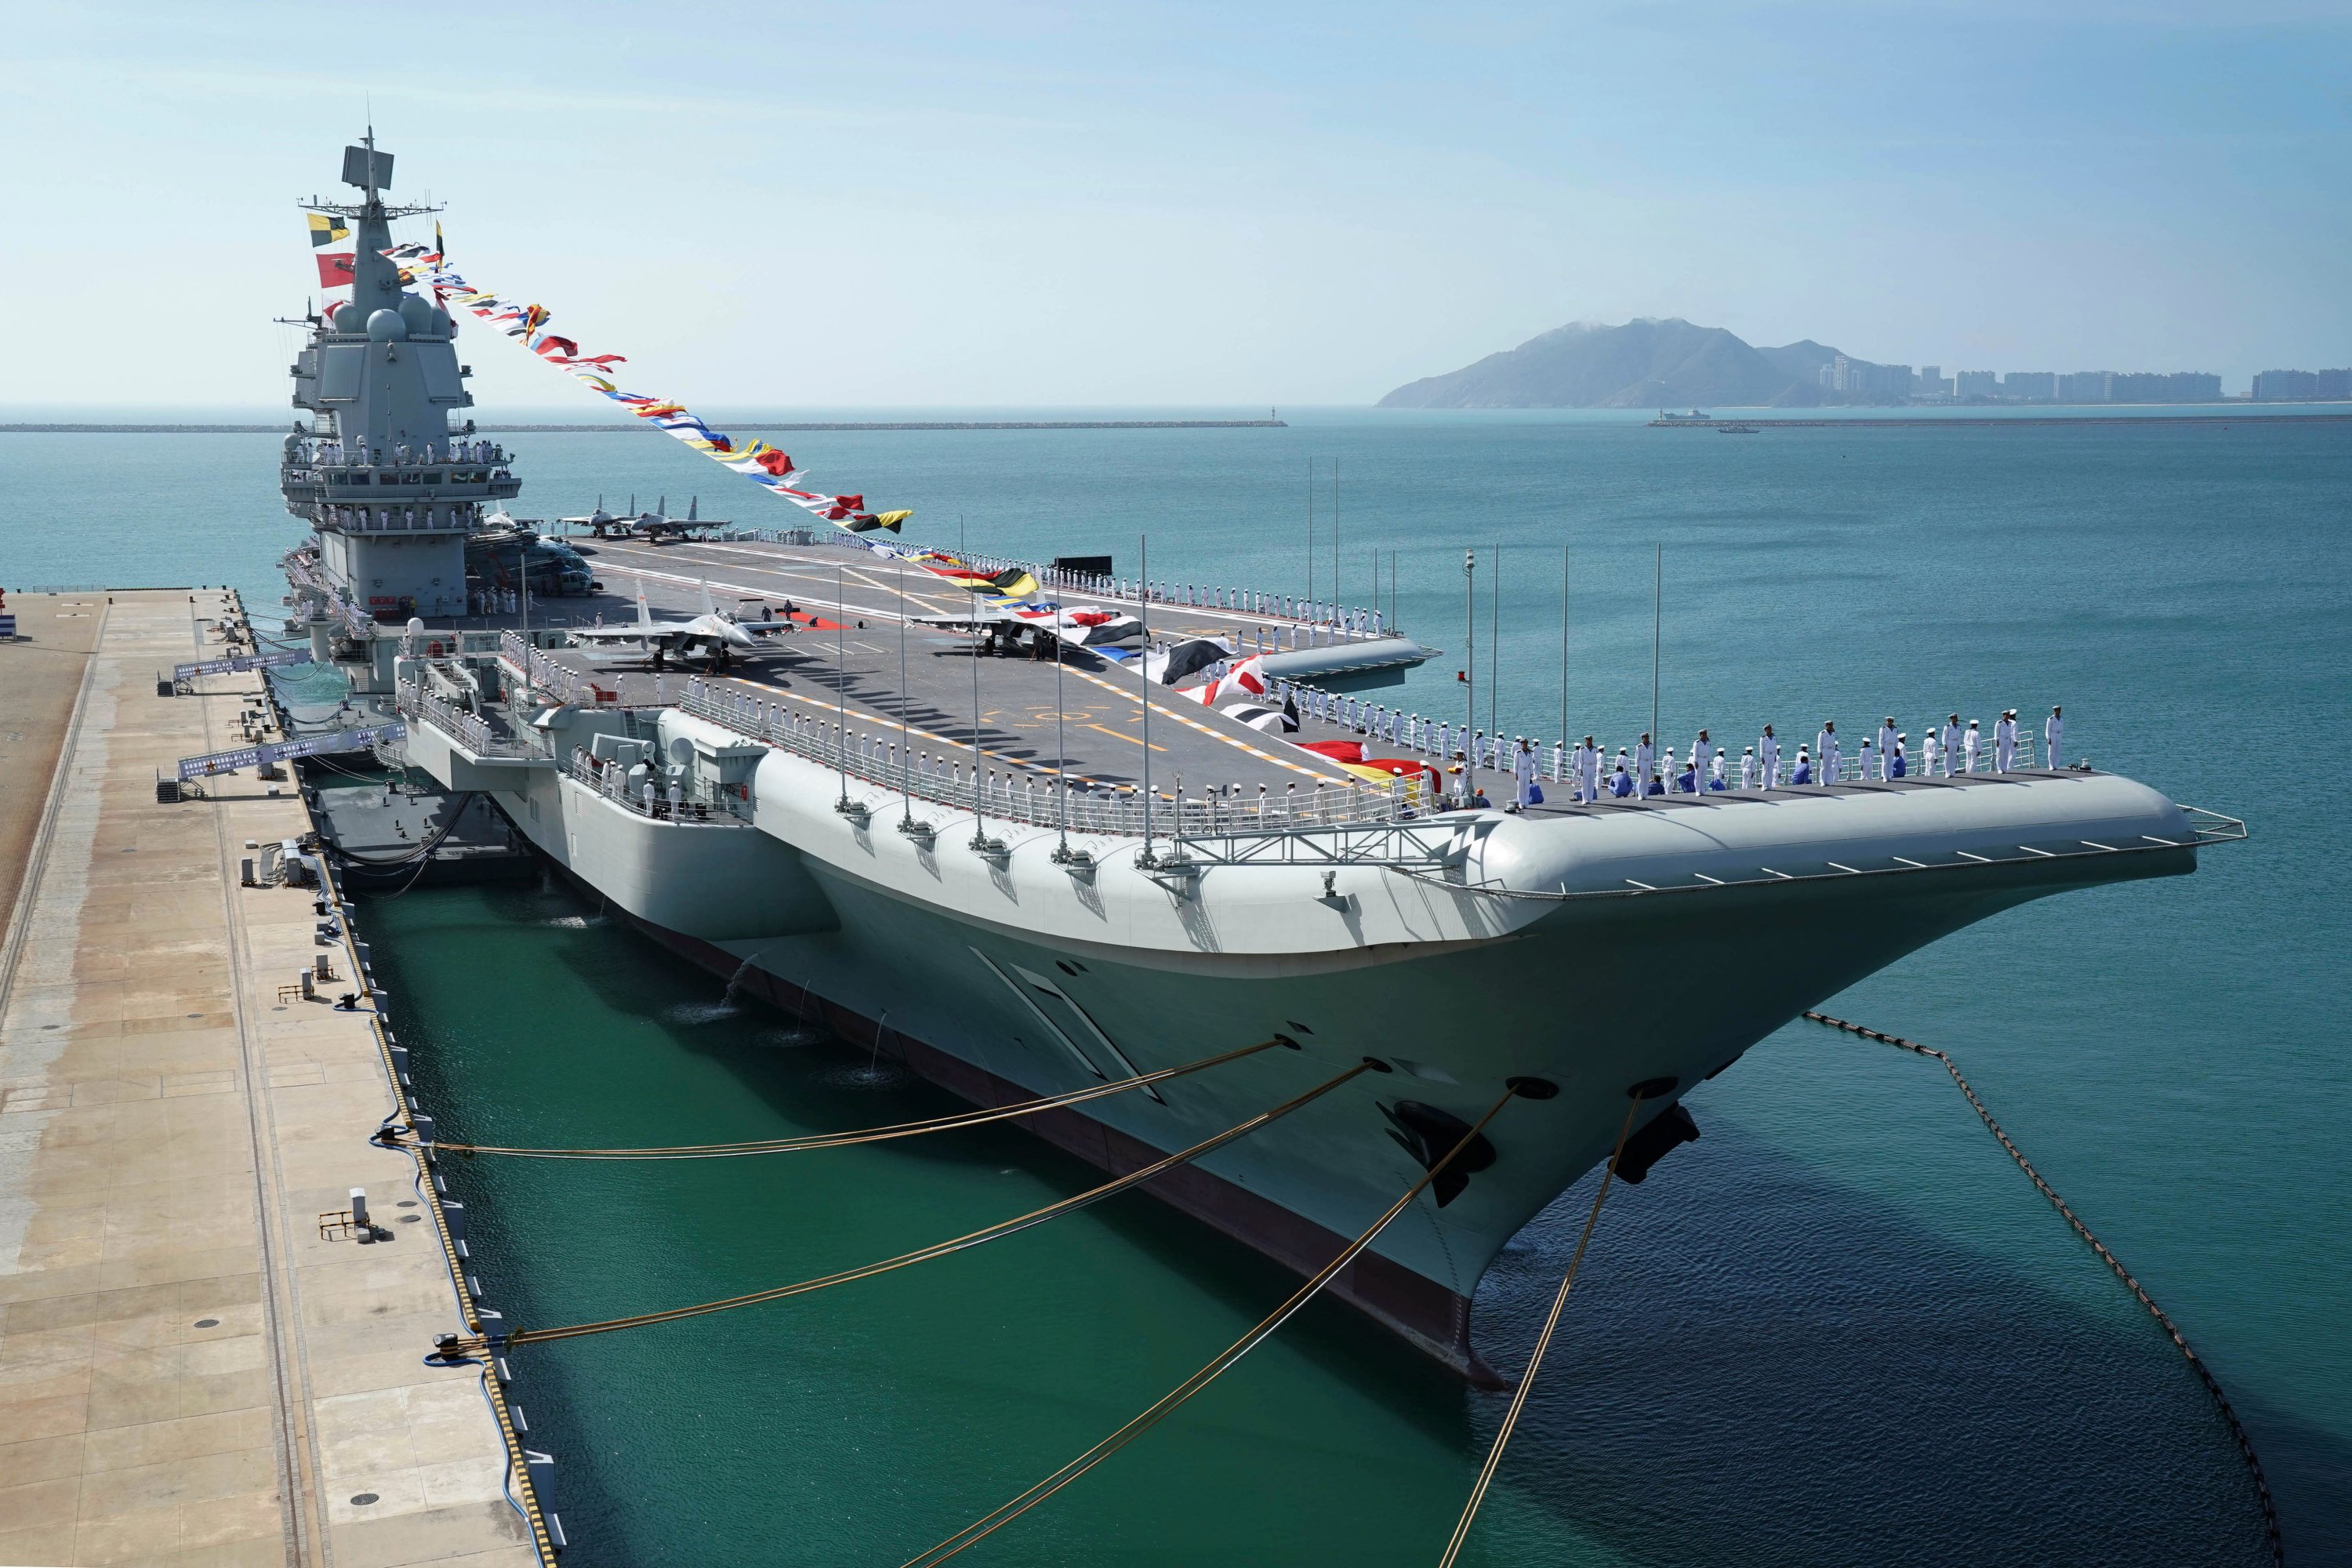 China plans to have carrier battle groups like US Navy: Indian Navy chief